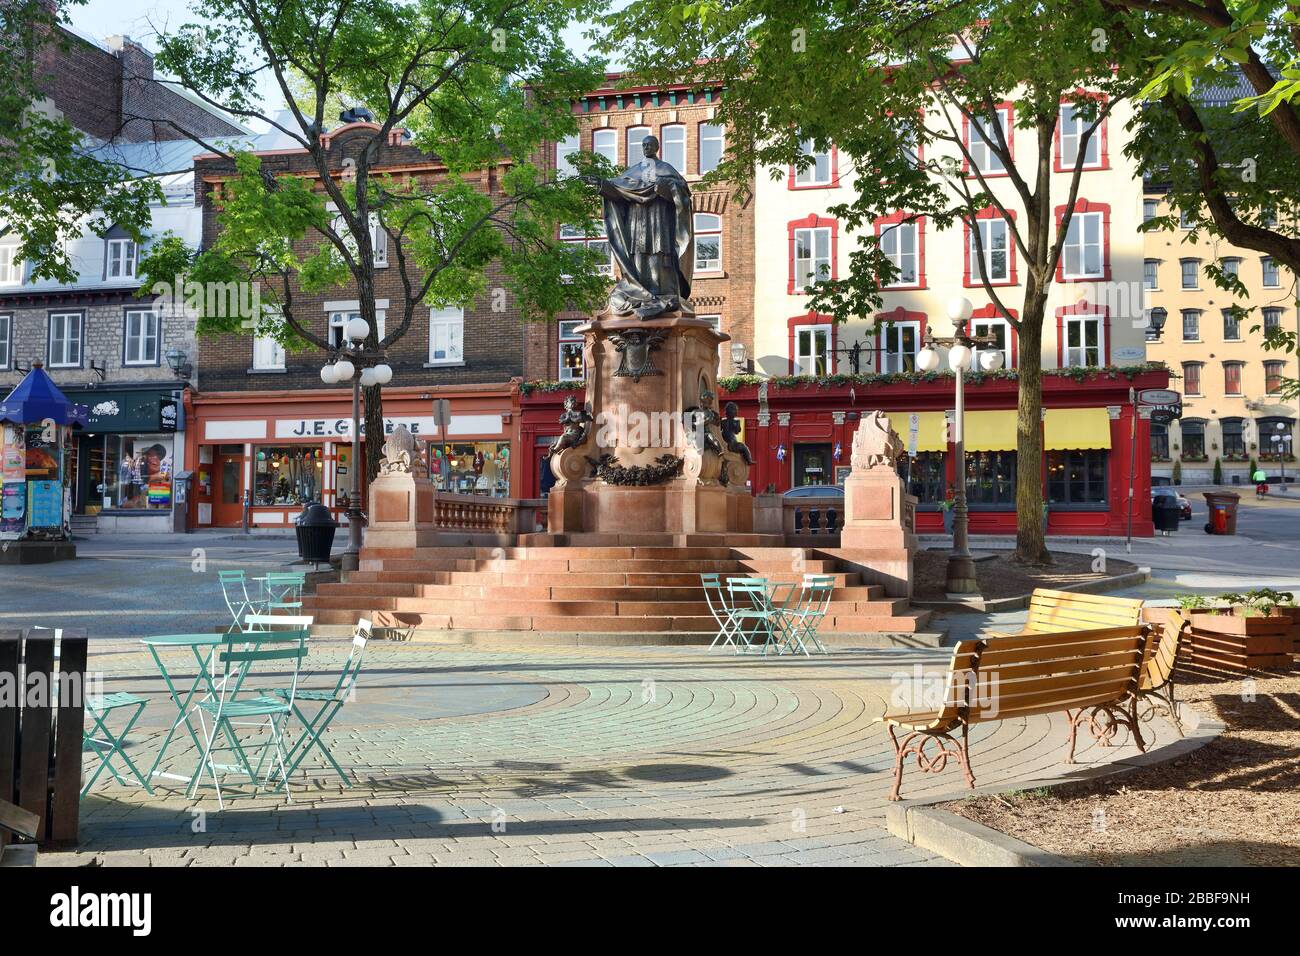 Place de l'Hotel-de-Ville (City Hall Square) across from Quebec City Hall. The monument honours Canada's first cardinal, Elzear-Alexandre Tashereau, Upper Town, Old Quebec City, Province of Quebec, Canada Stock Photo